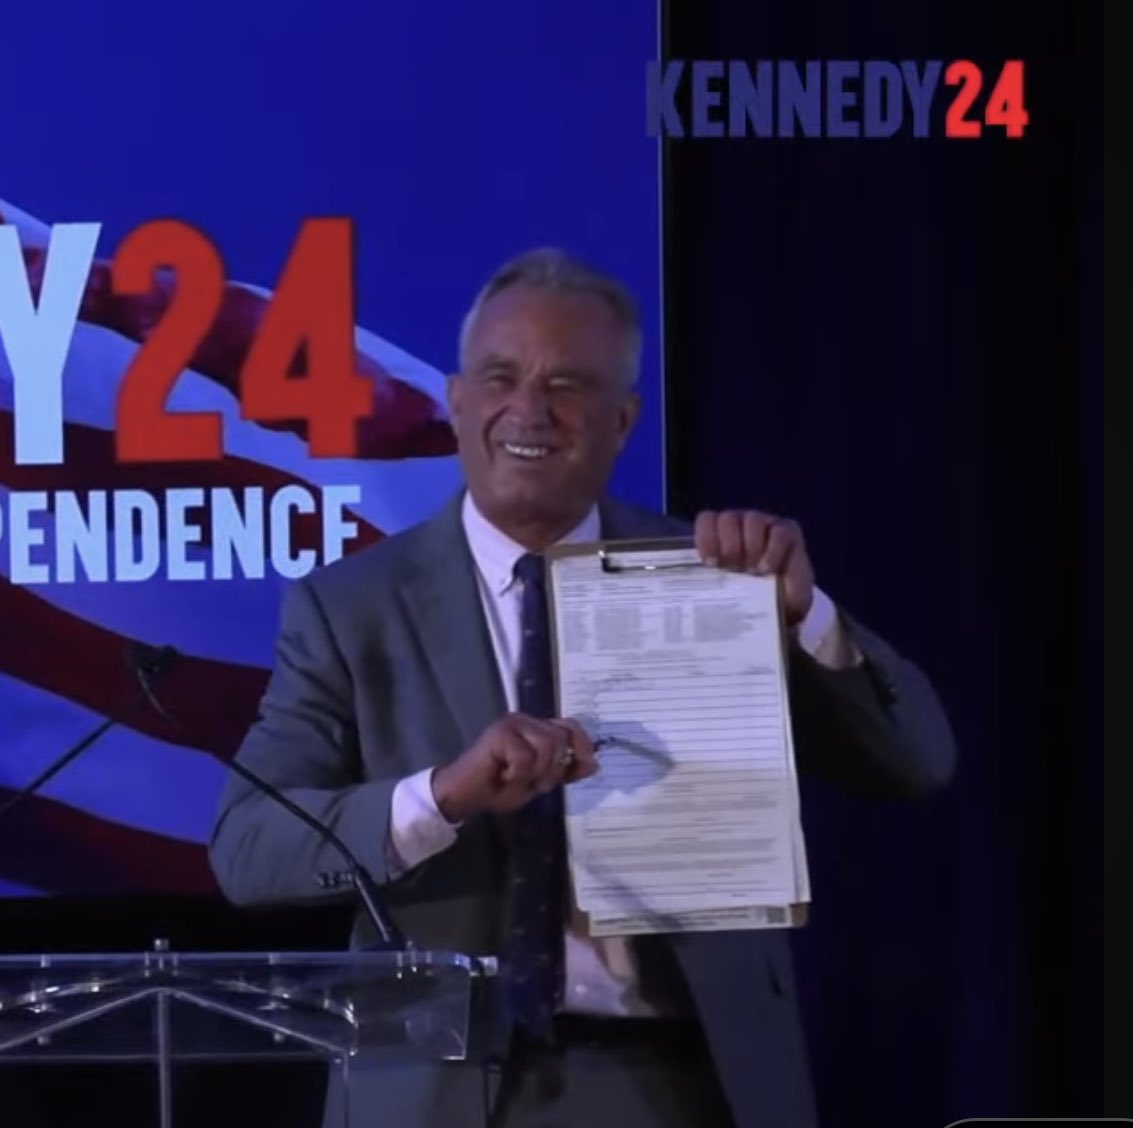 Breaking: @RobertKennedyJr signs his own Petition to get on the NY Ballot since he’s a registered NY Voter #Kennedy2024